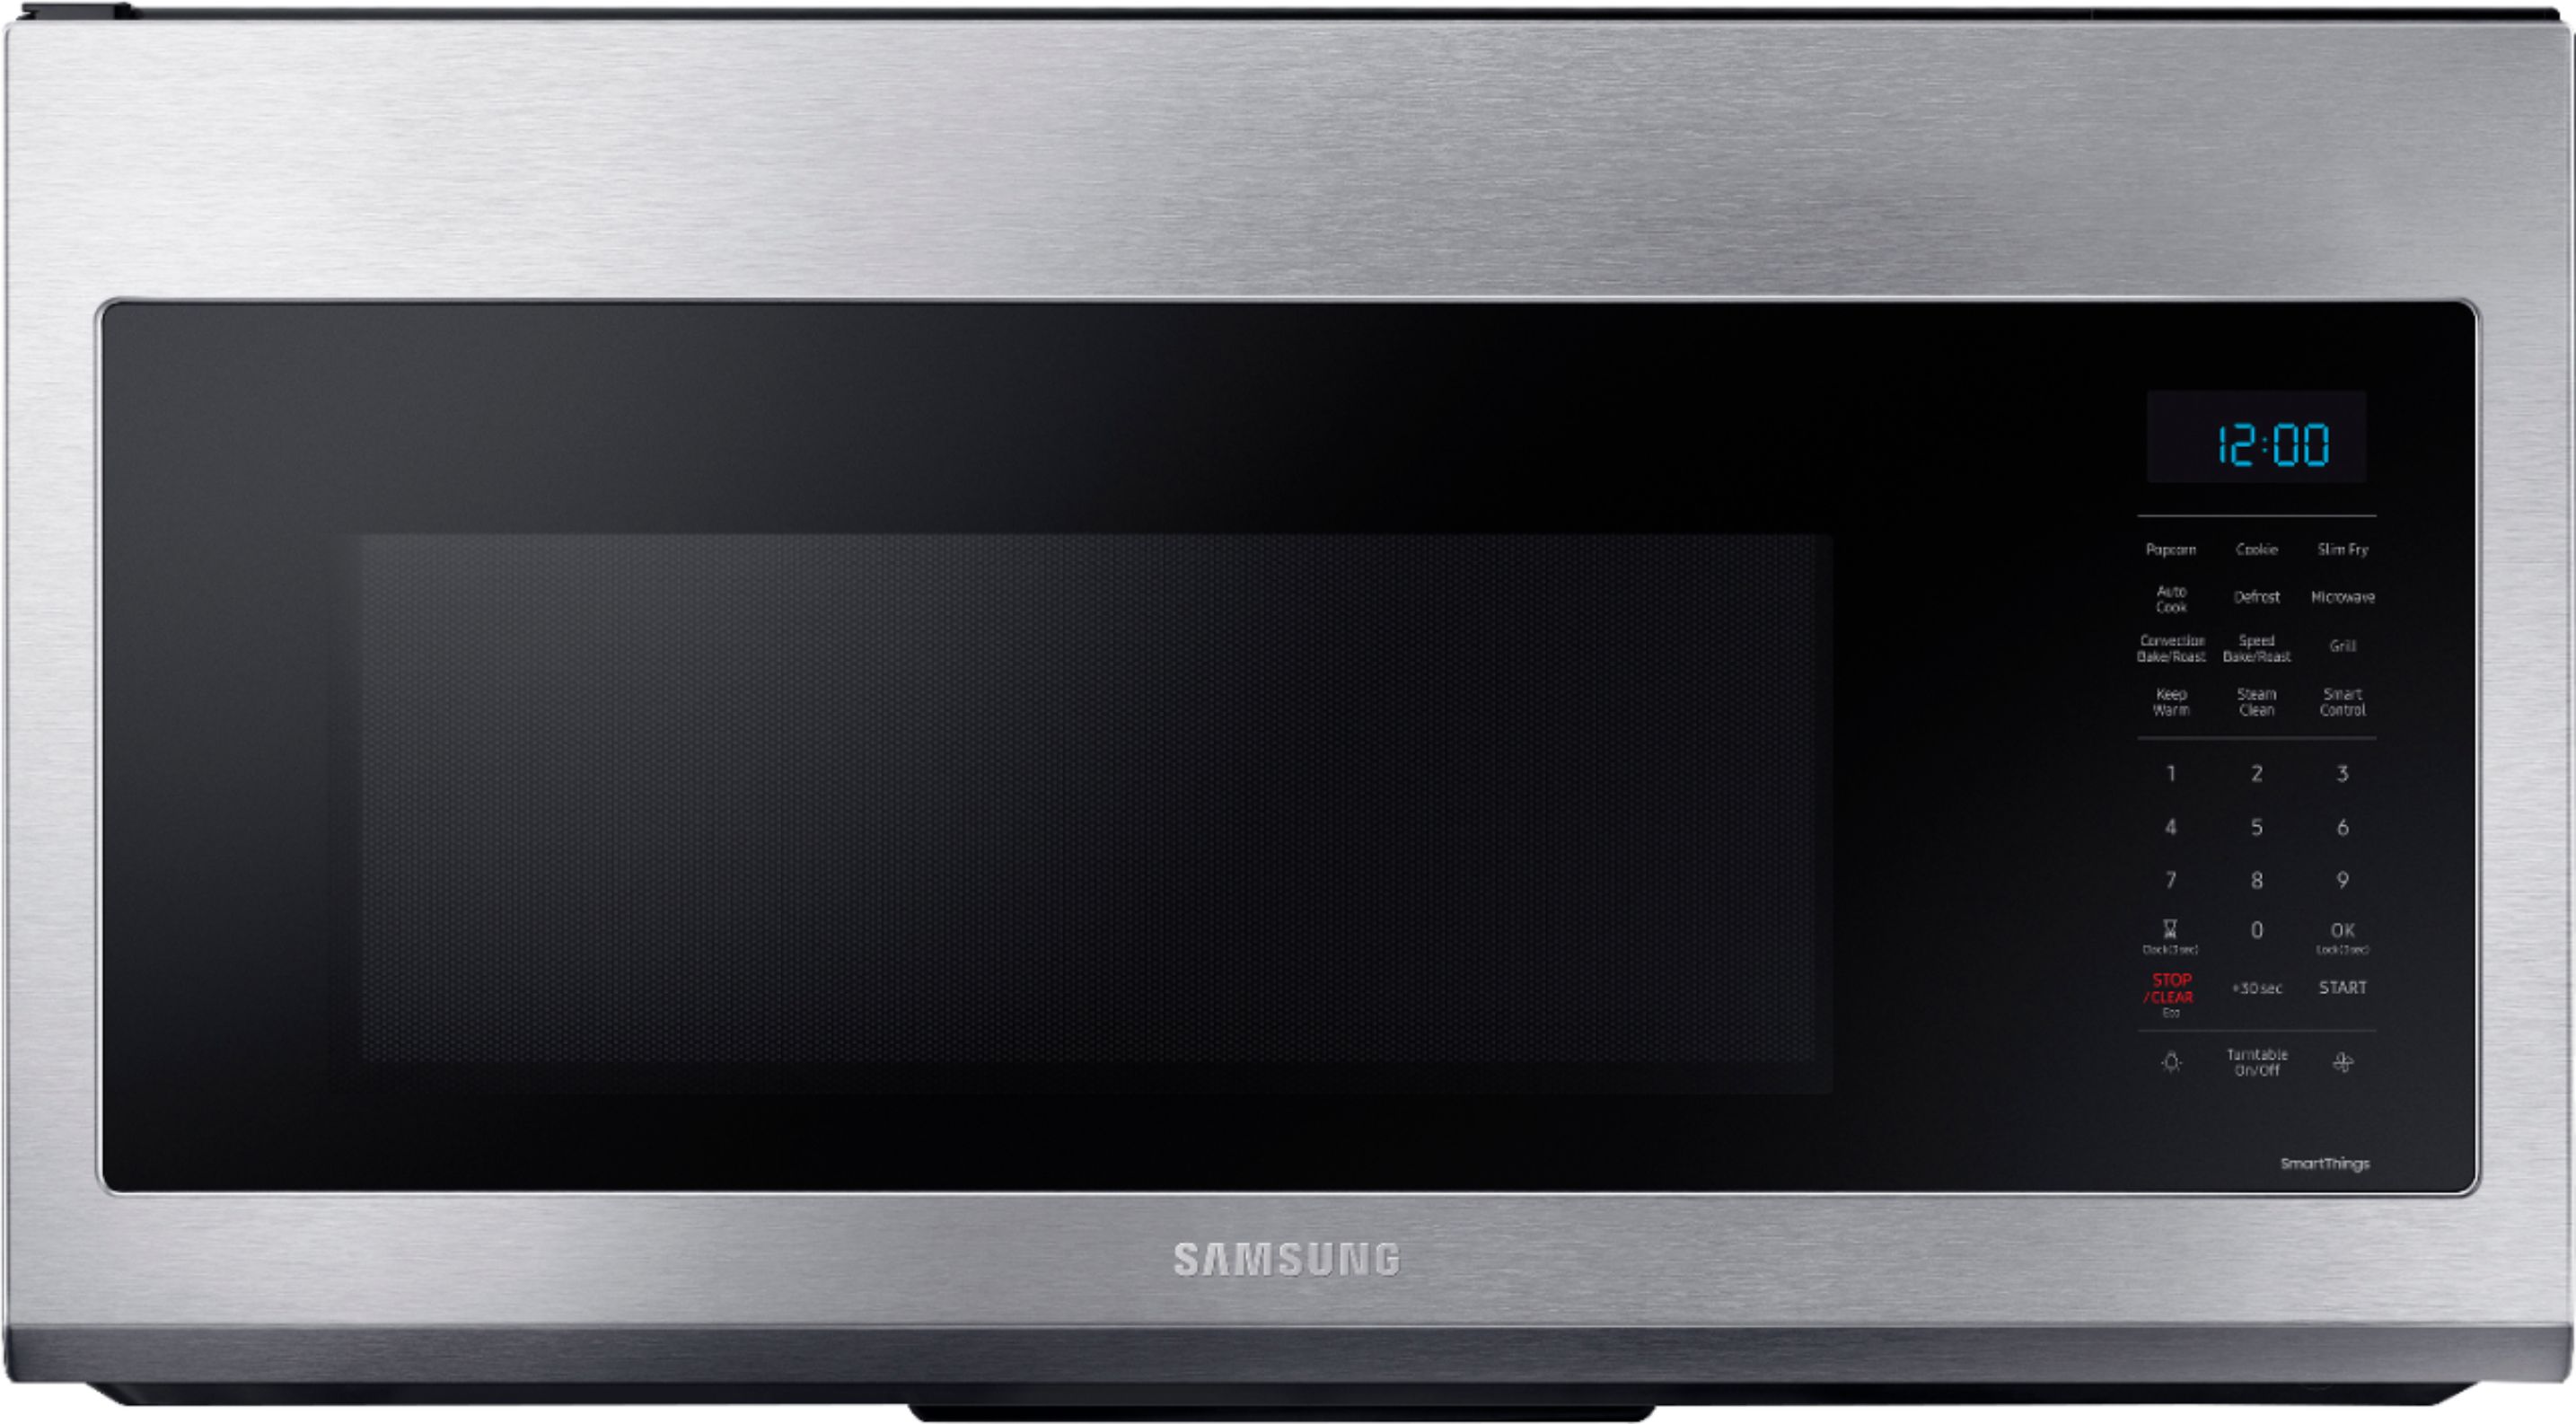 Compare Samsung 1.7 cu. ft. OvertheRange Convection Microwave with WiFi Fingerprint